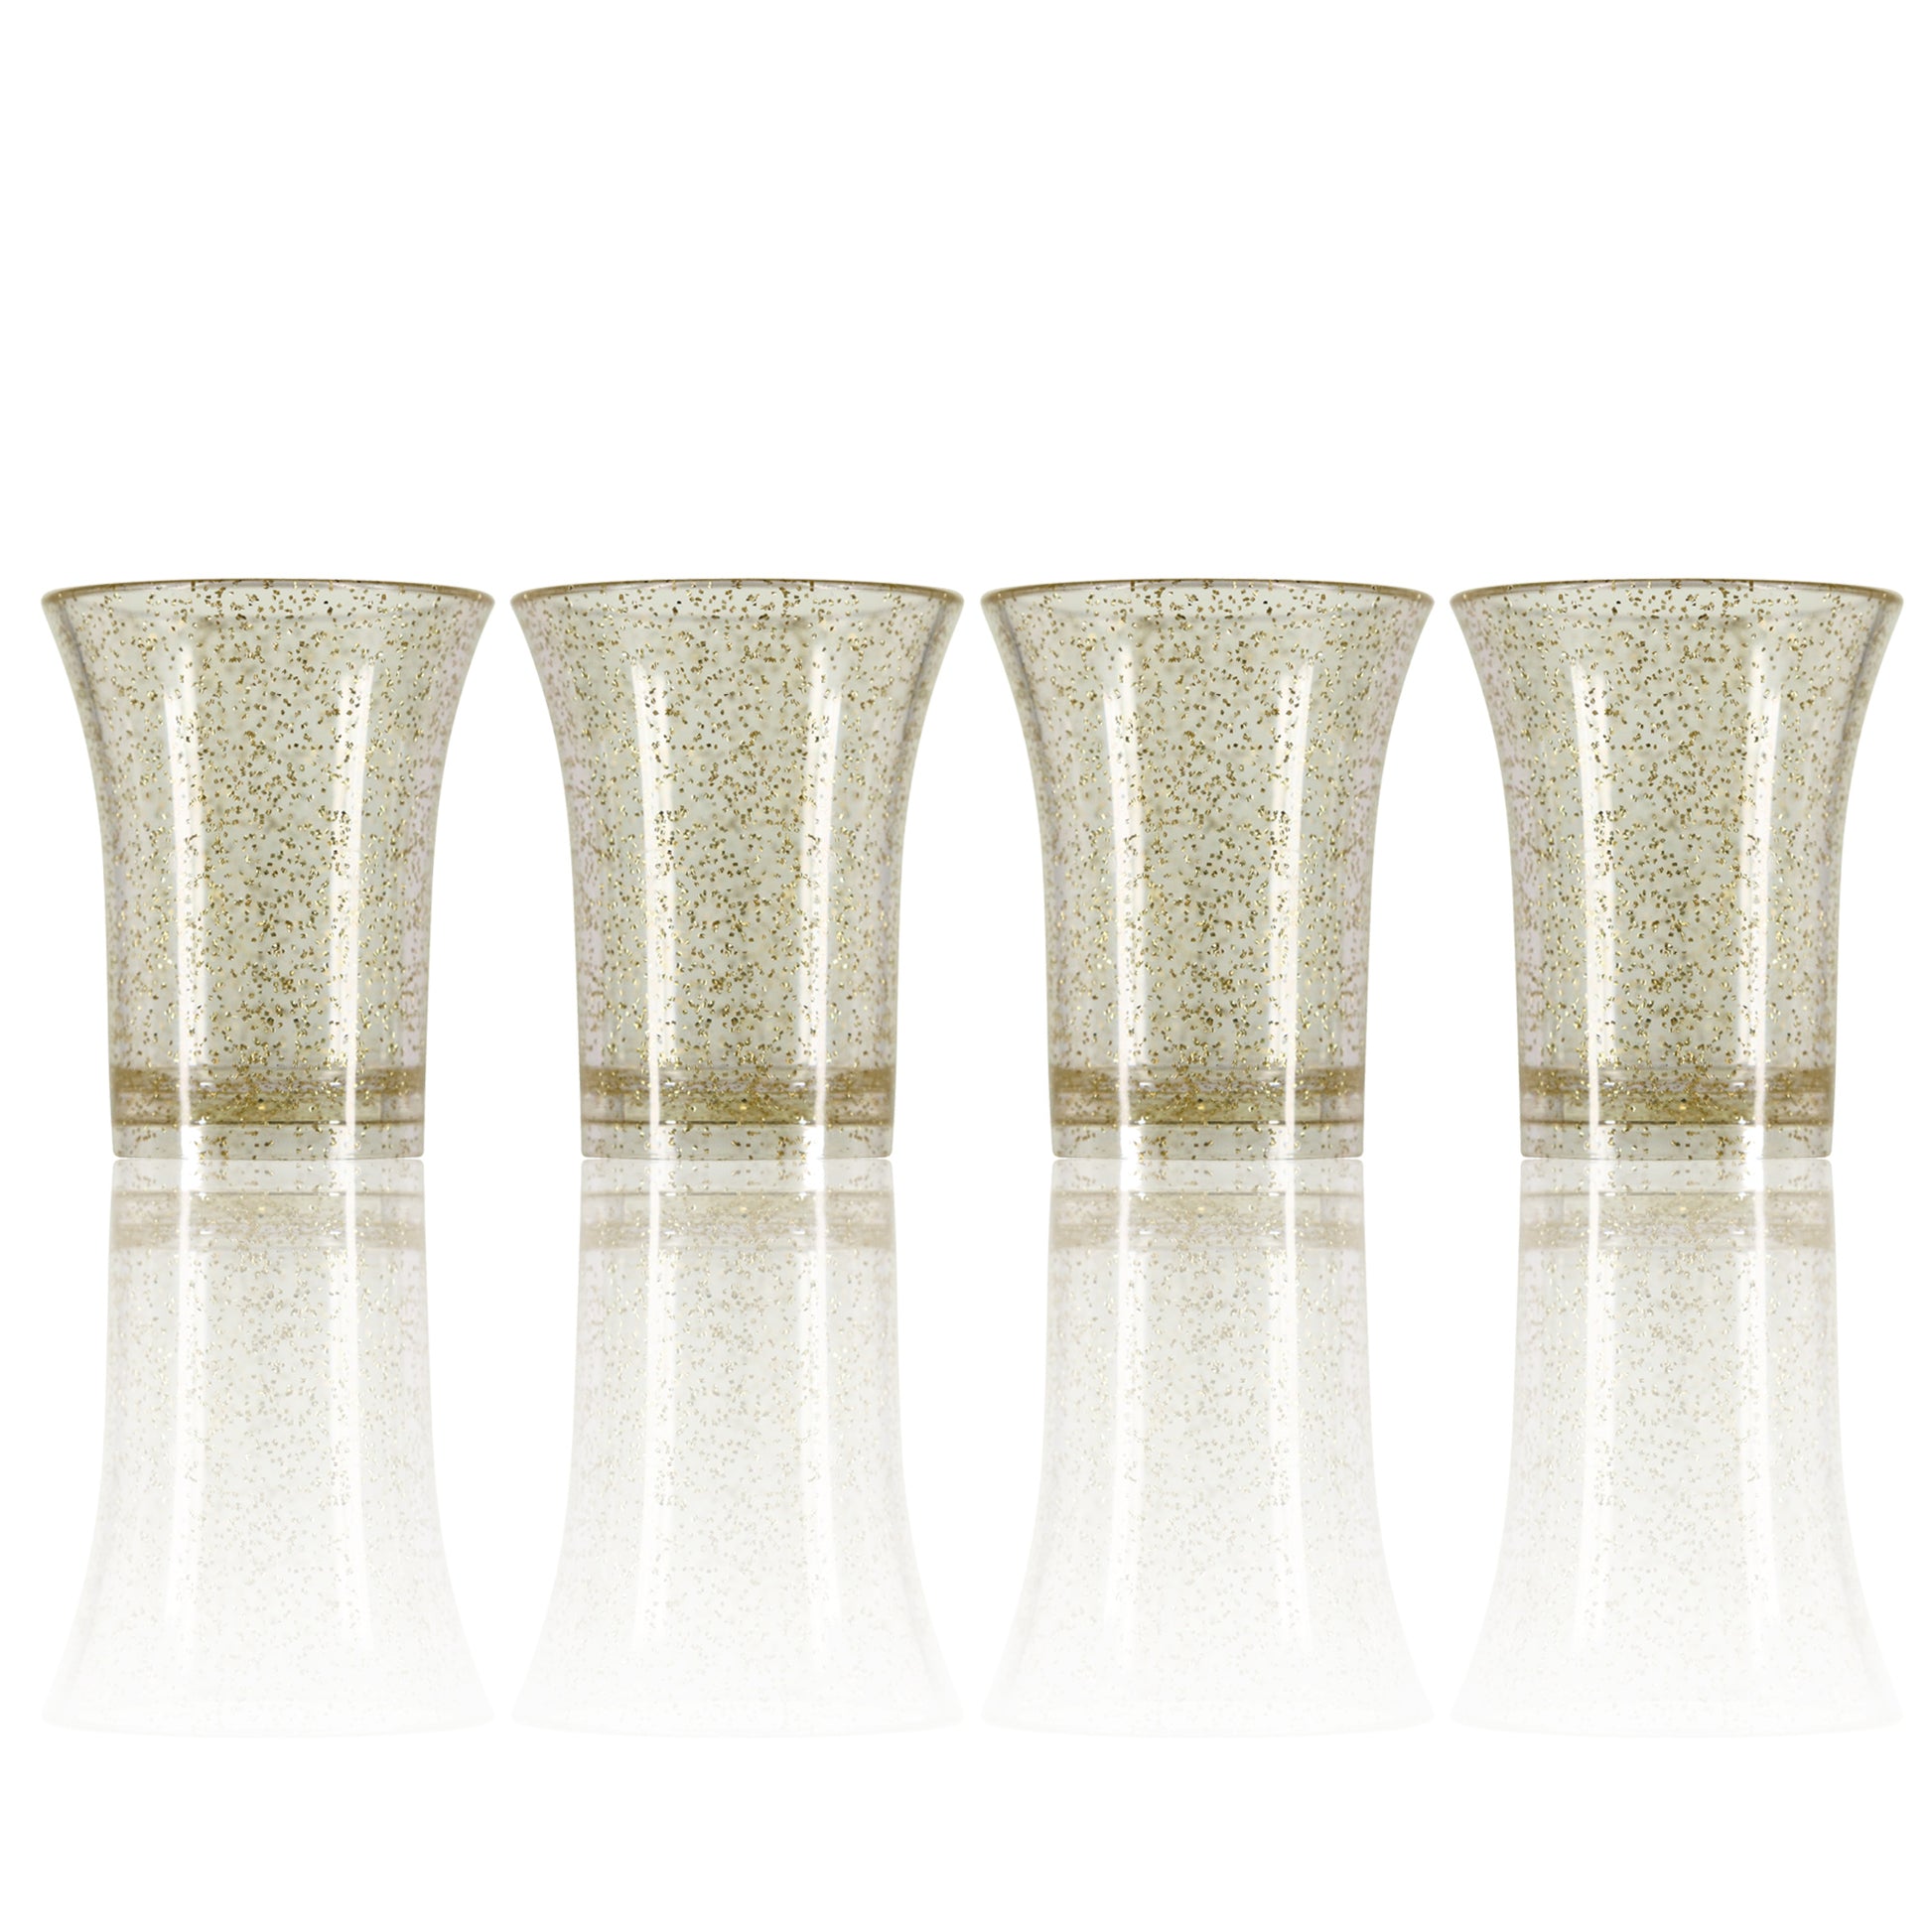 10 x Gold Glitter Shot Glasses - Heavy Duty Strong Reusable Plastic 25ml 30ml Stackable. Dishwasher Safe Christmas, Anniversaries, Sparkly-5056020186908-PCUP-SHOT-GG-10-Product Pro-Anniversary, Christmas, Glitter Shot Glasses, Gold, Gold Glitter, Shot Glasses, Shots